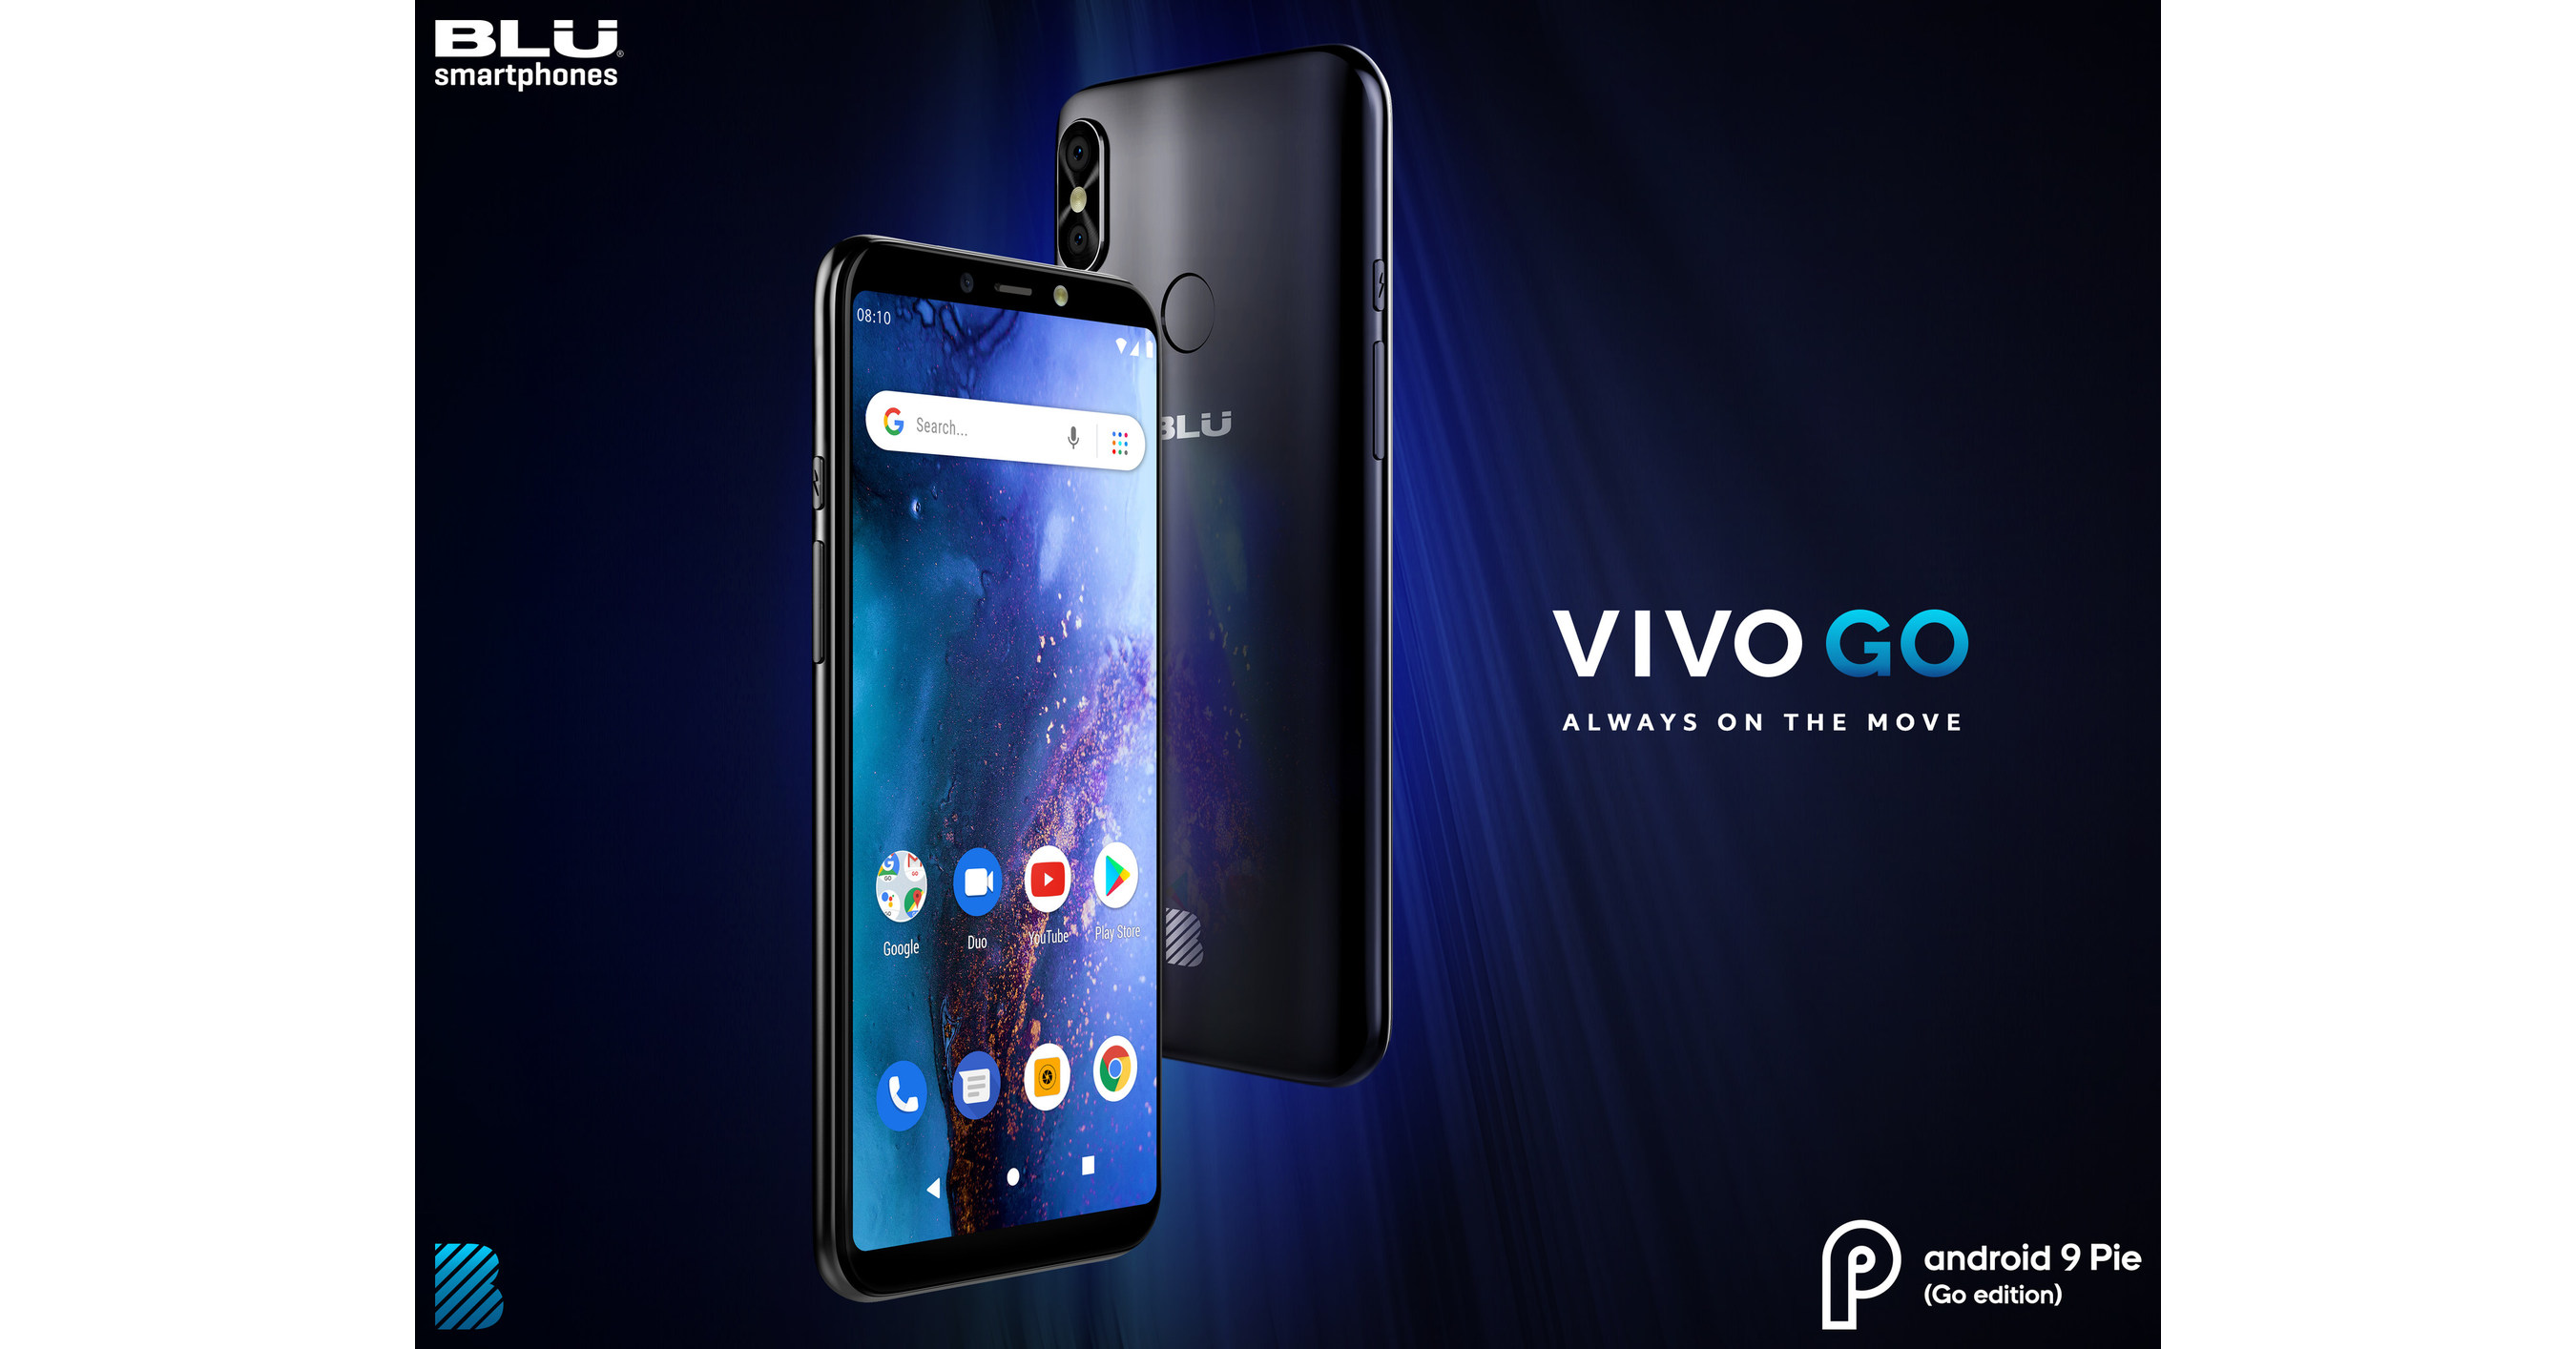 Blu To Introduce First Android 9 Pie Go Edition Smartphone In The U S The Blu Vivo Go For Just 79 99